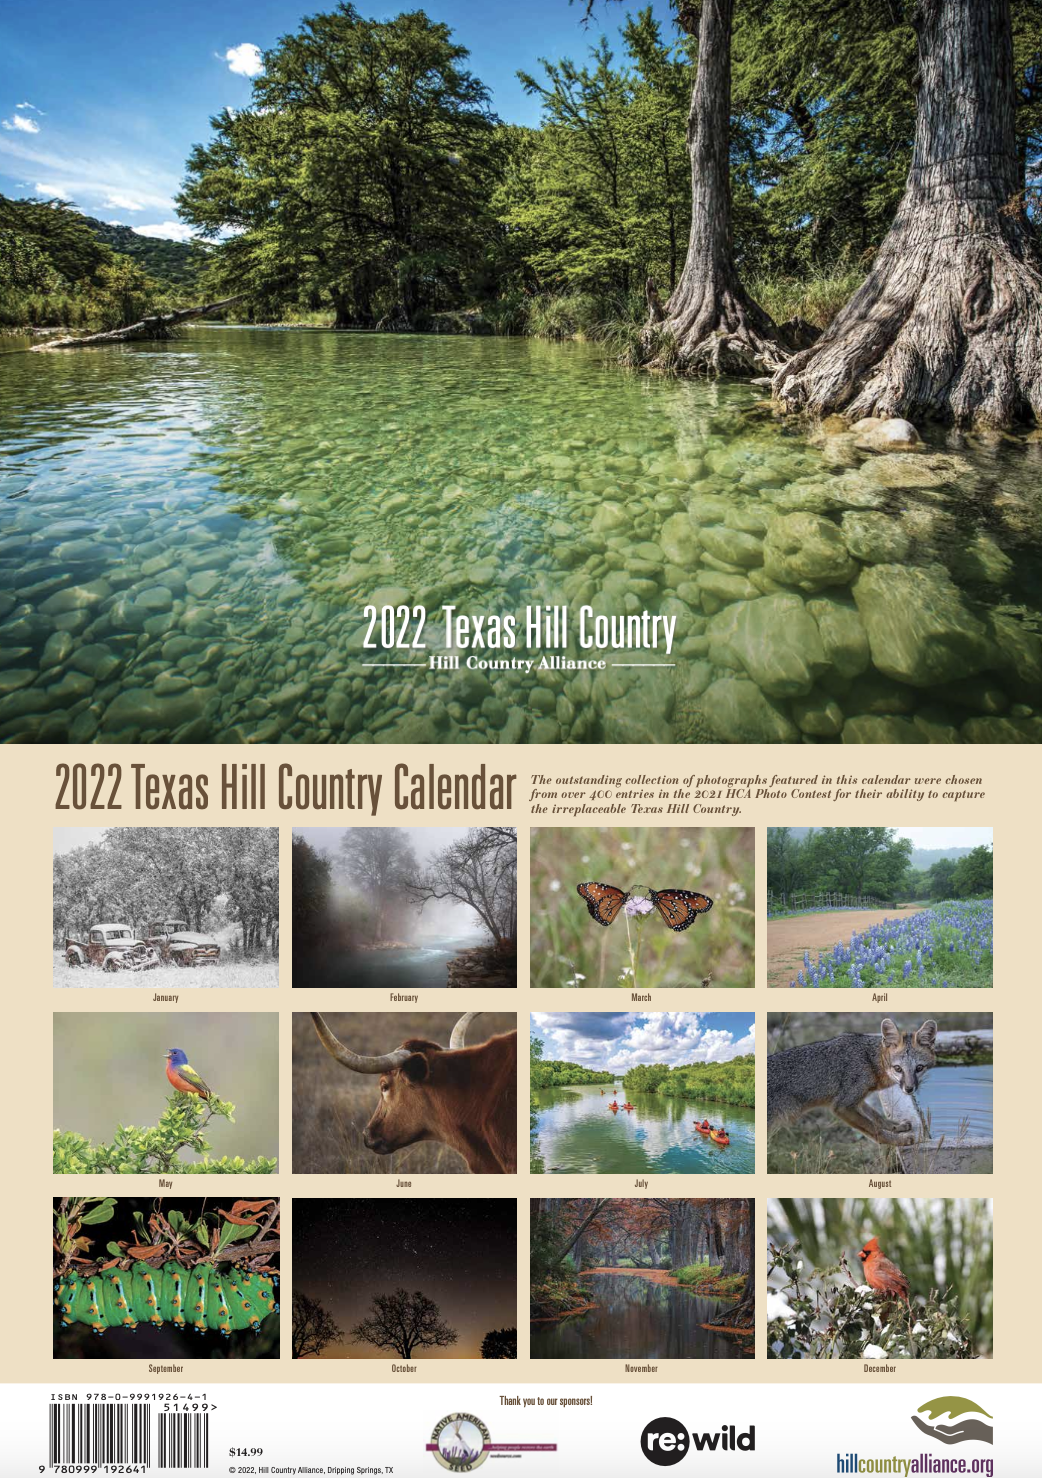 2021 Hill Country Photo Contest Winners Announced & 2022 Calendar For Sale!